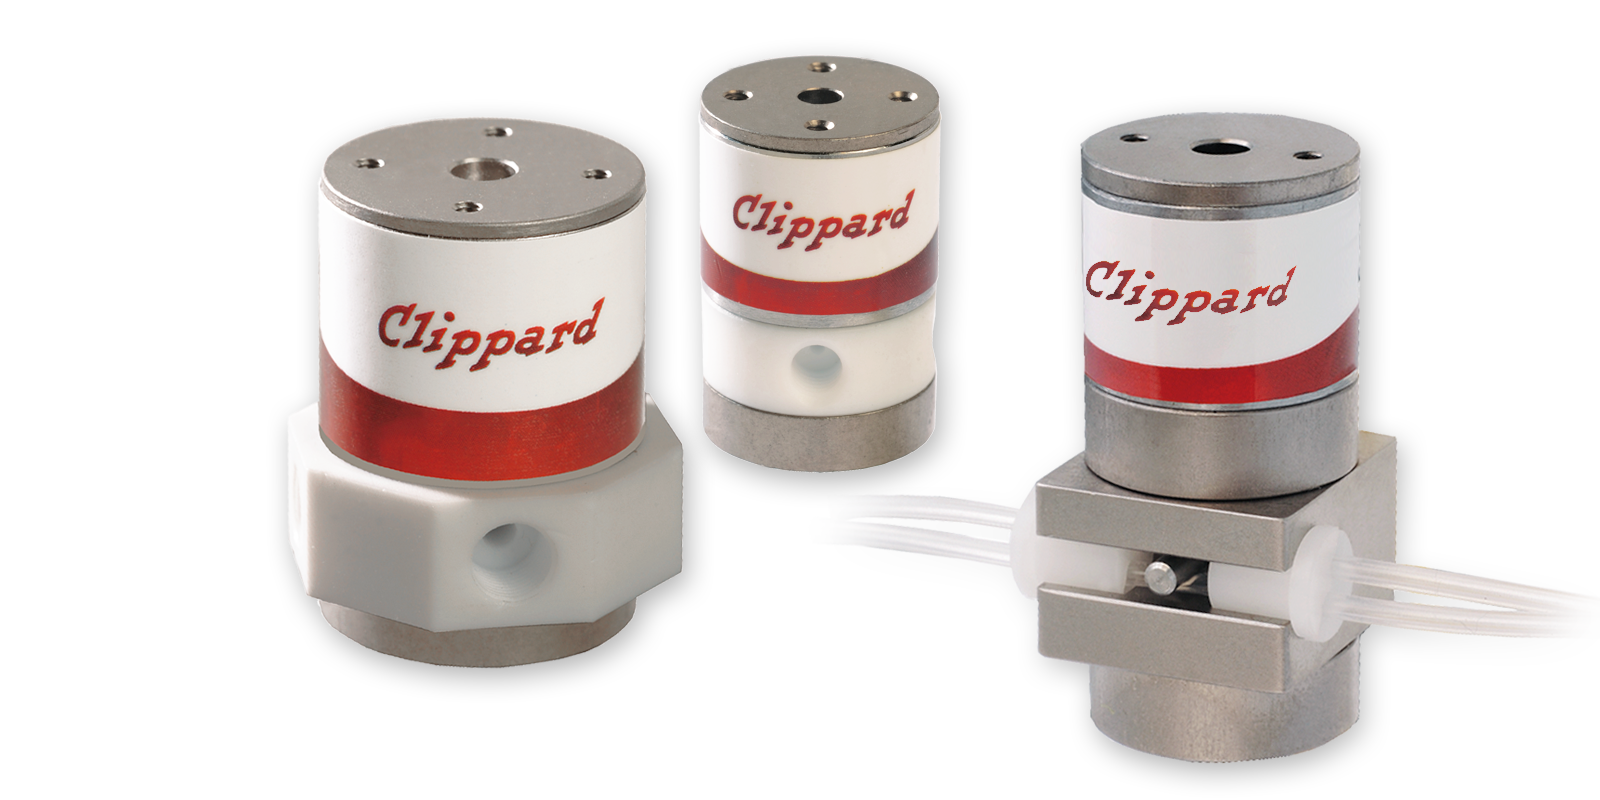 Hit and hold recommendations for Clippard NIV PTFE media isolation valves and NPV pinch valves